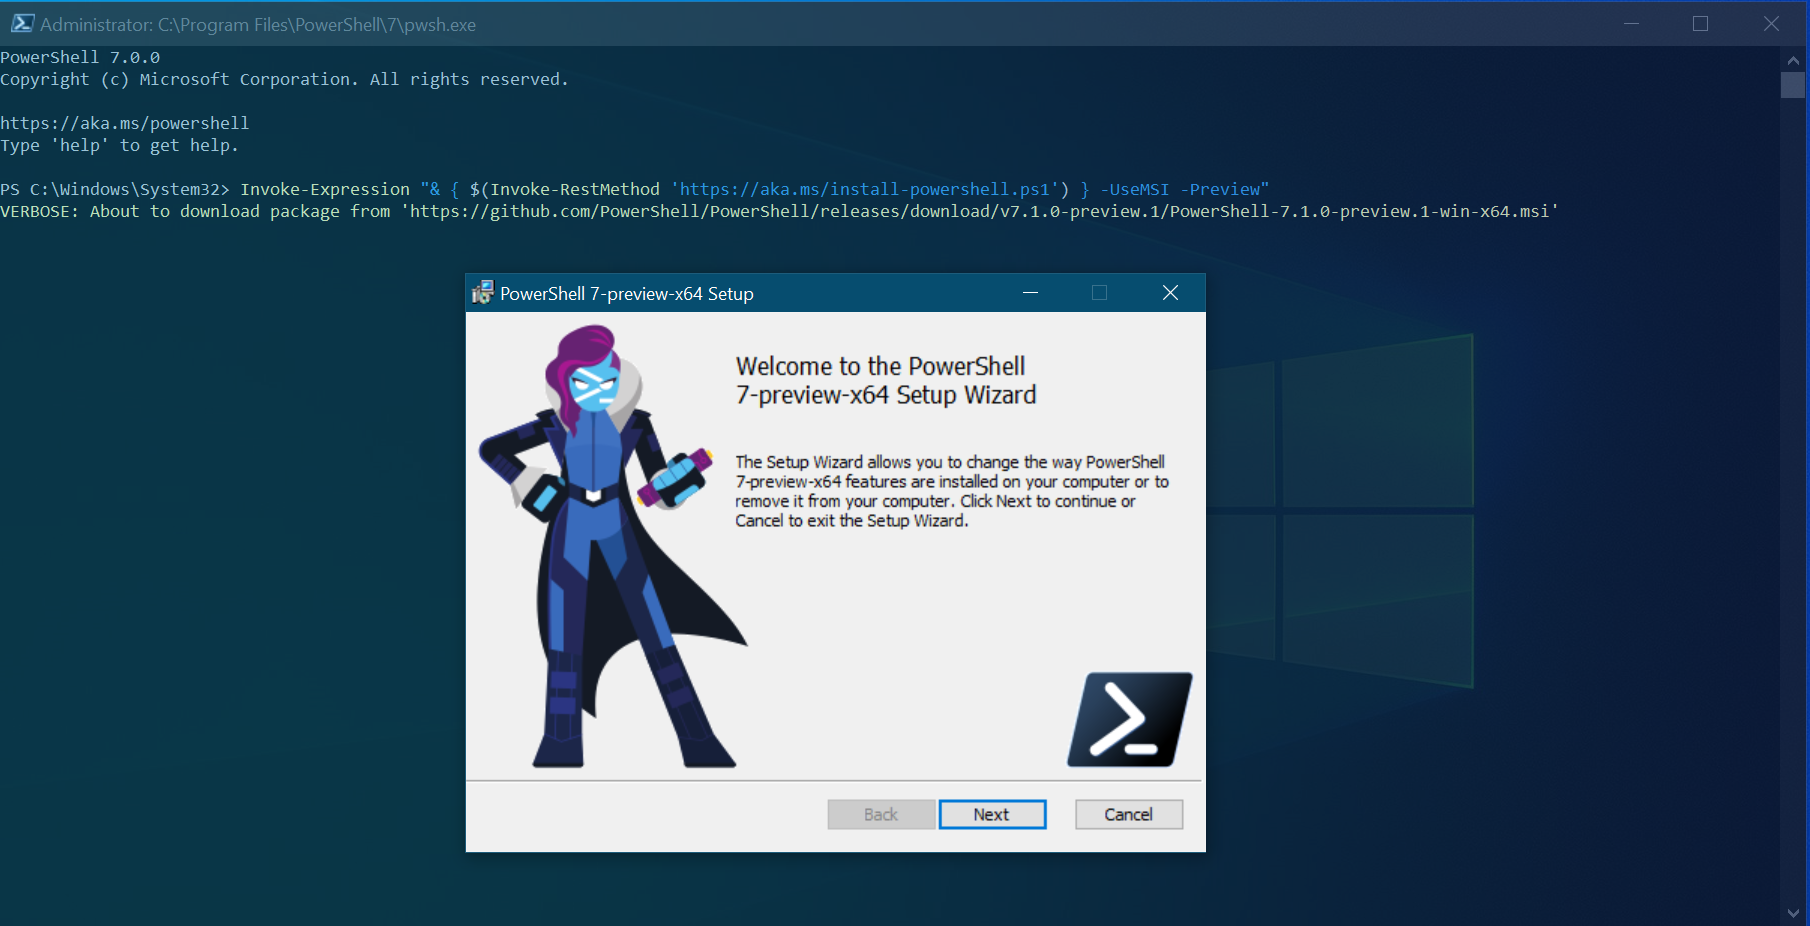 Updating PowerShell to Preview release